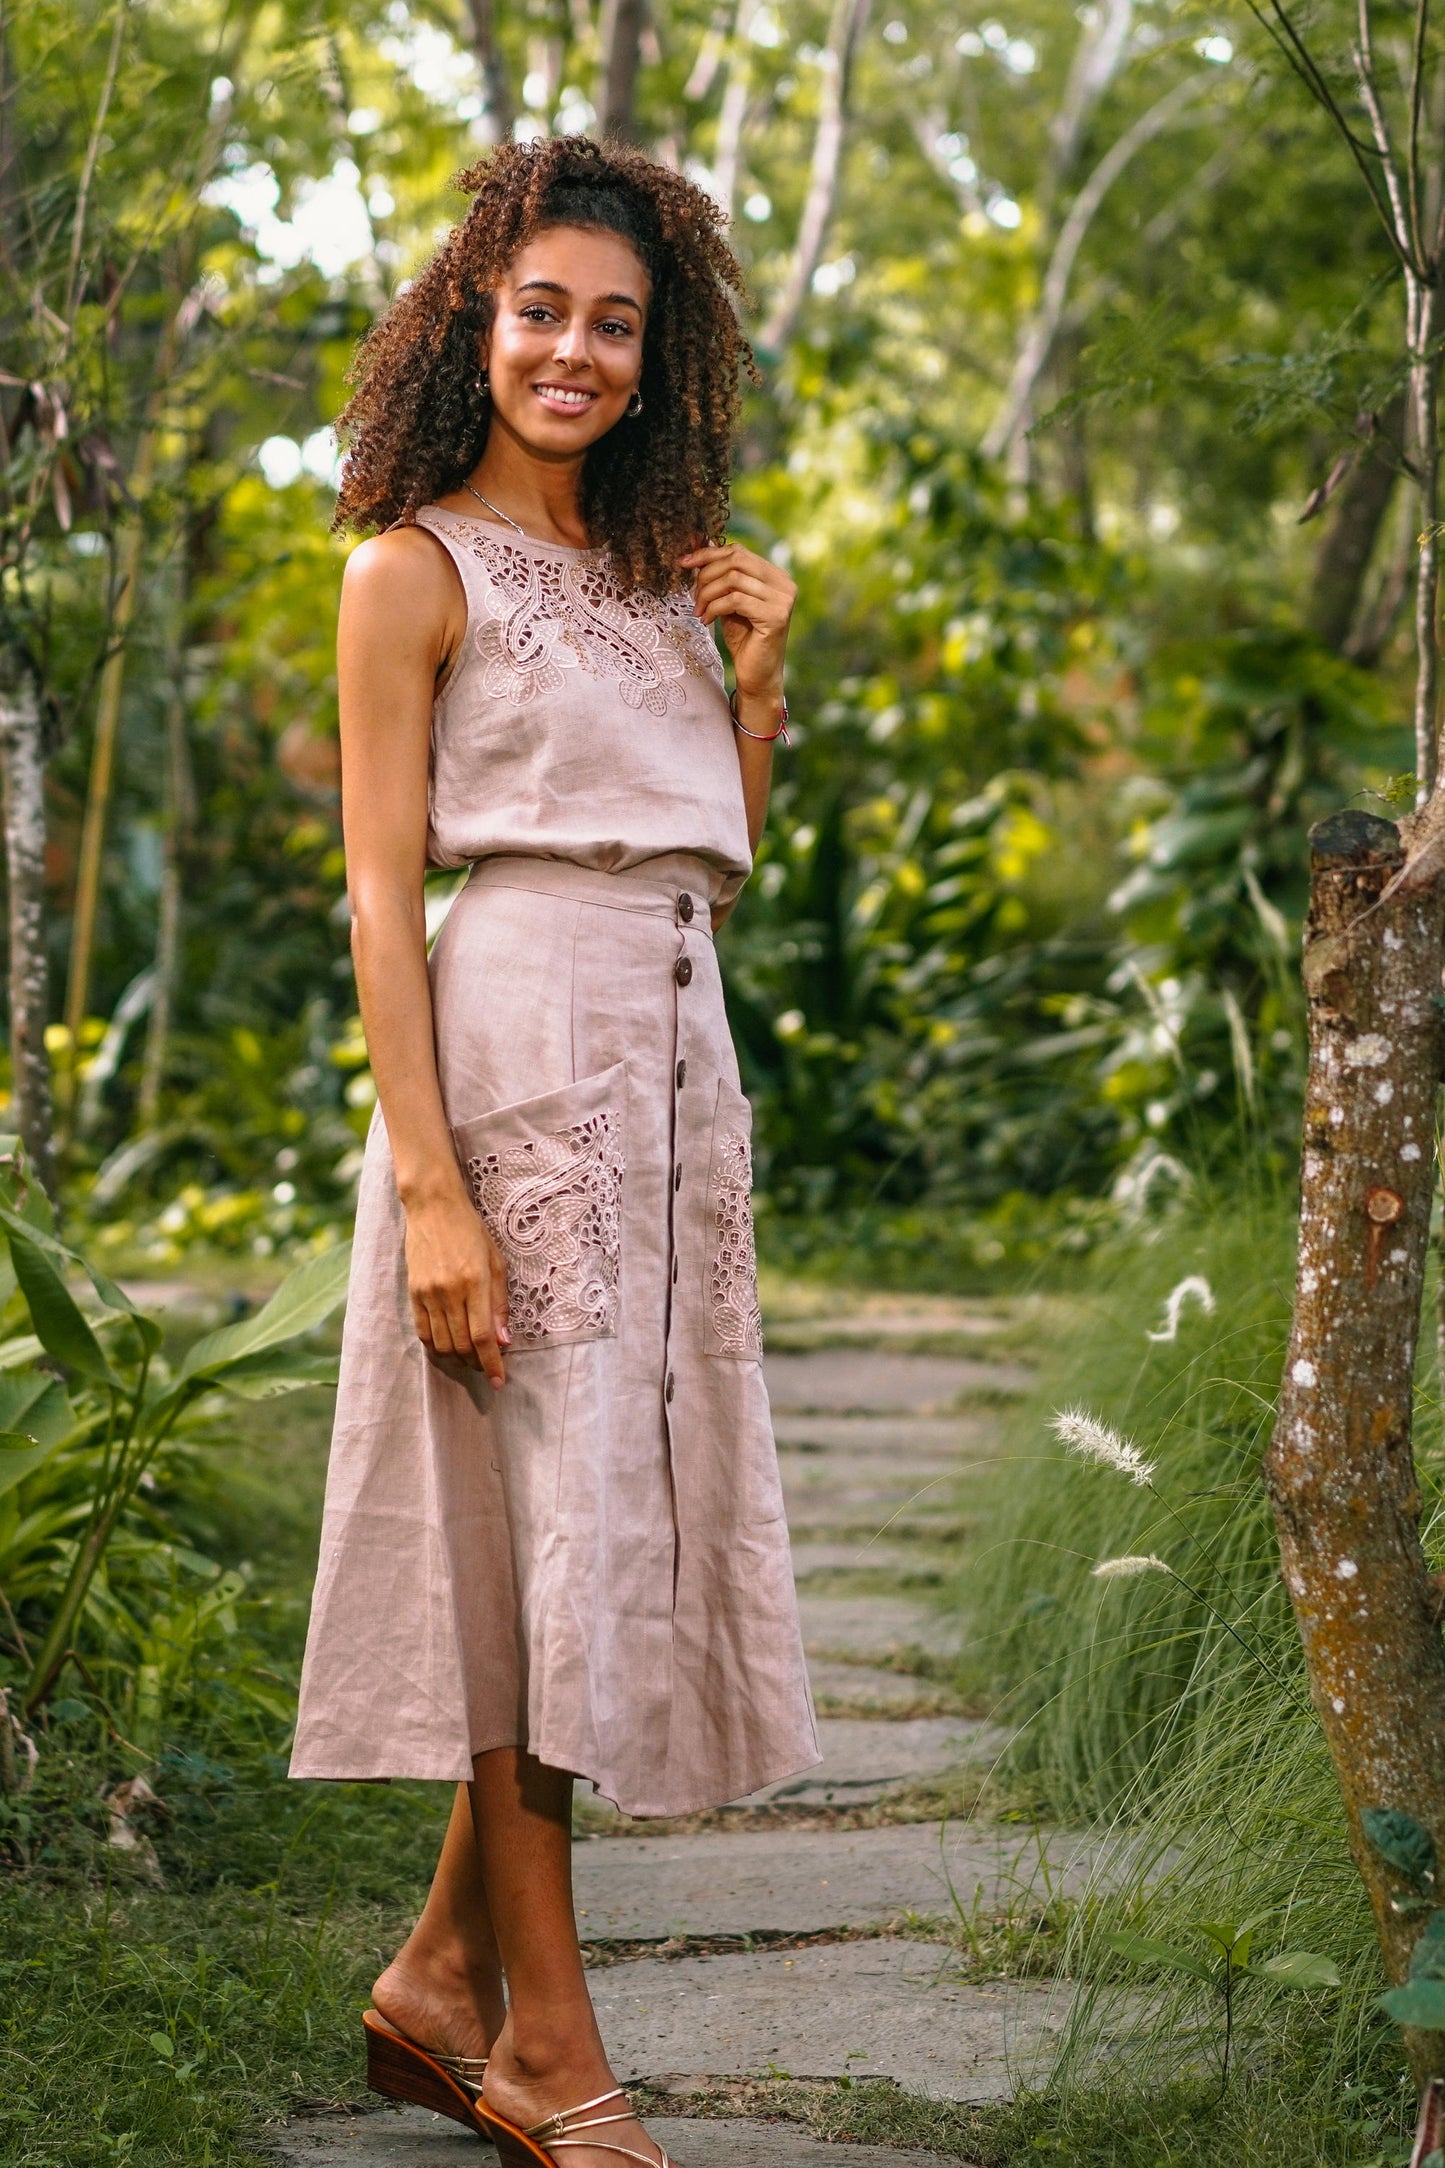 Juicy Fruit in Natural Hand Embroidered Knee-Length Skirt